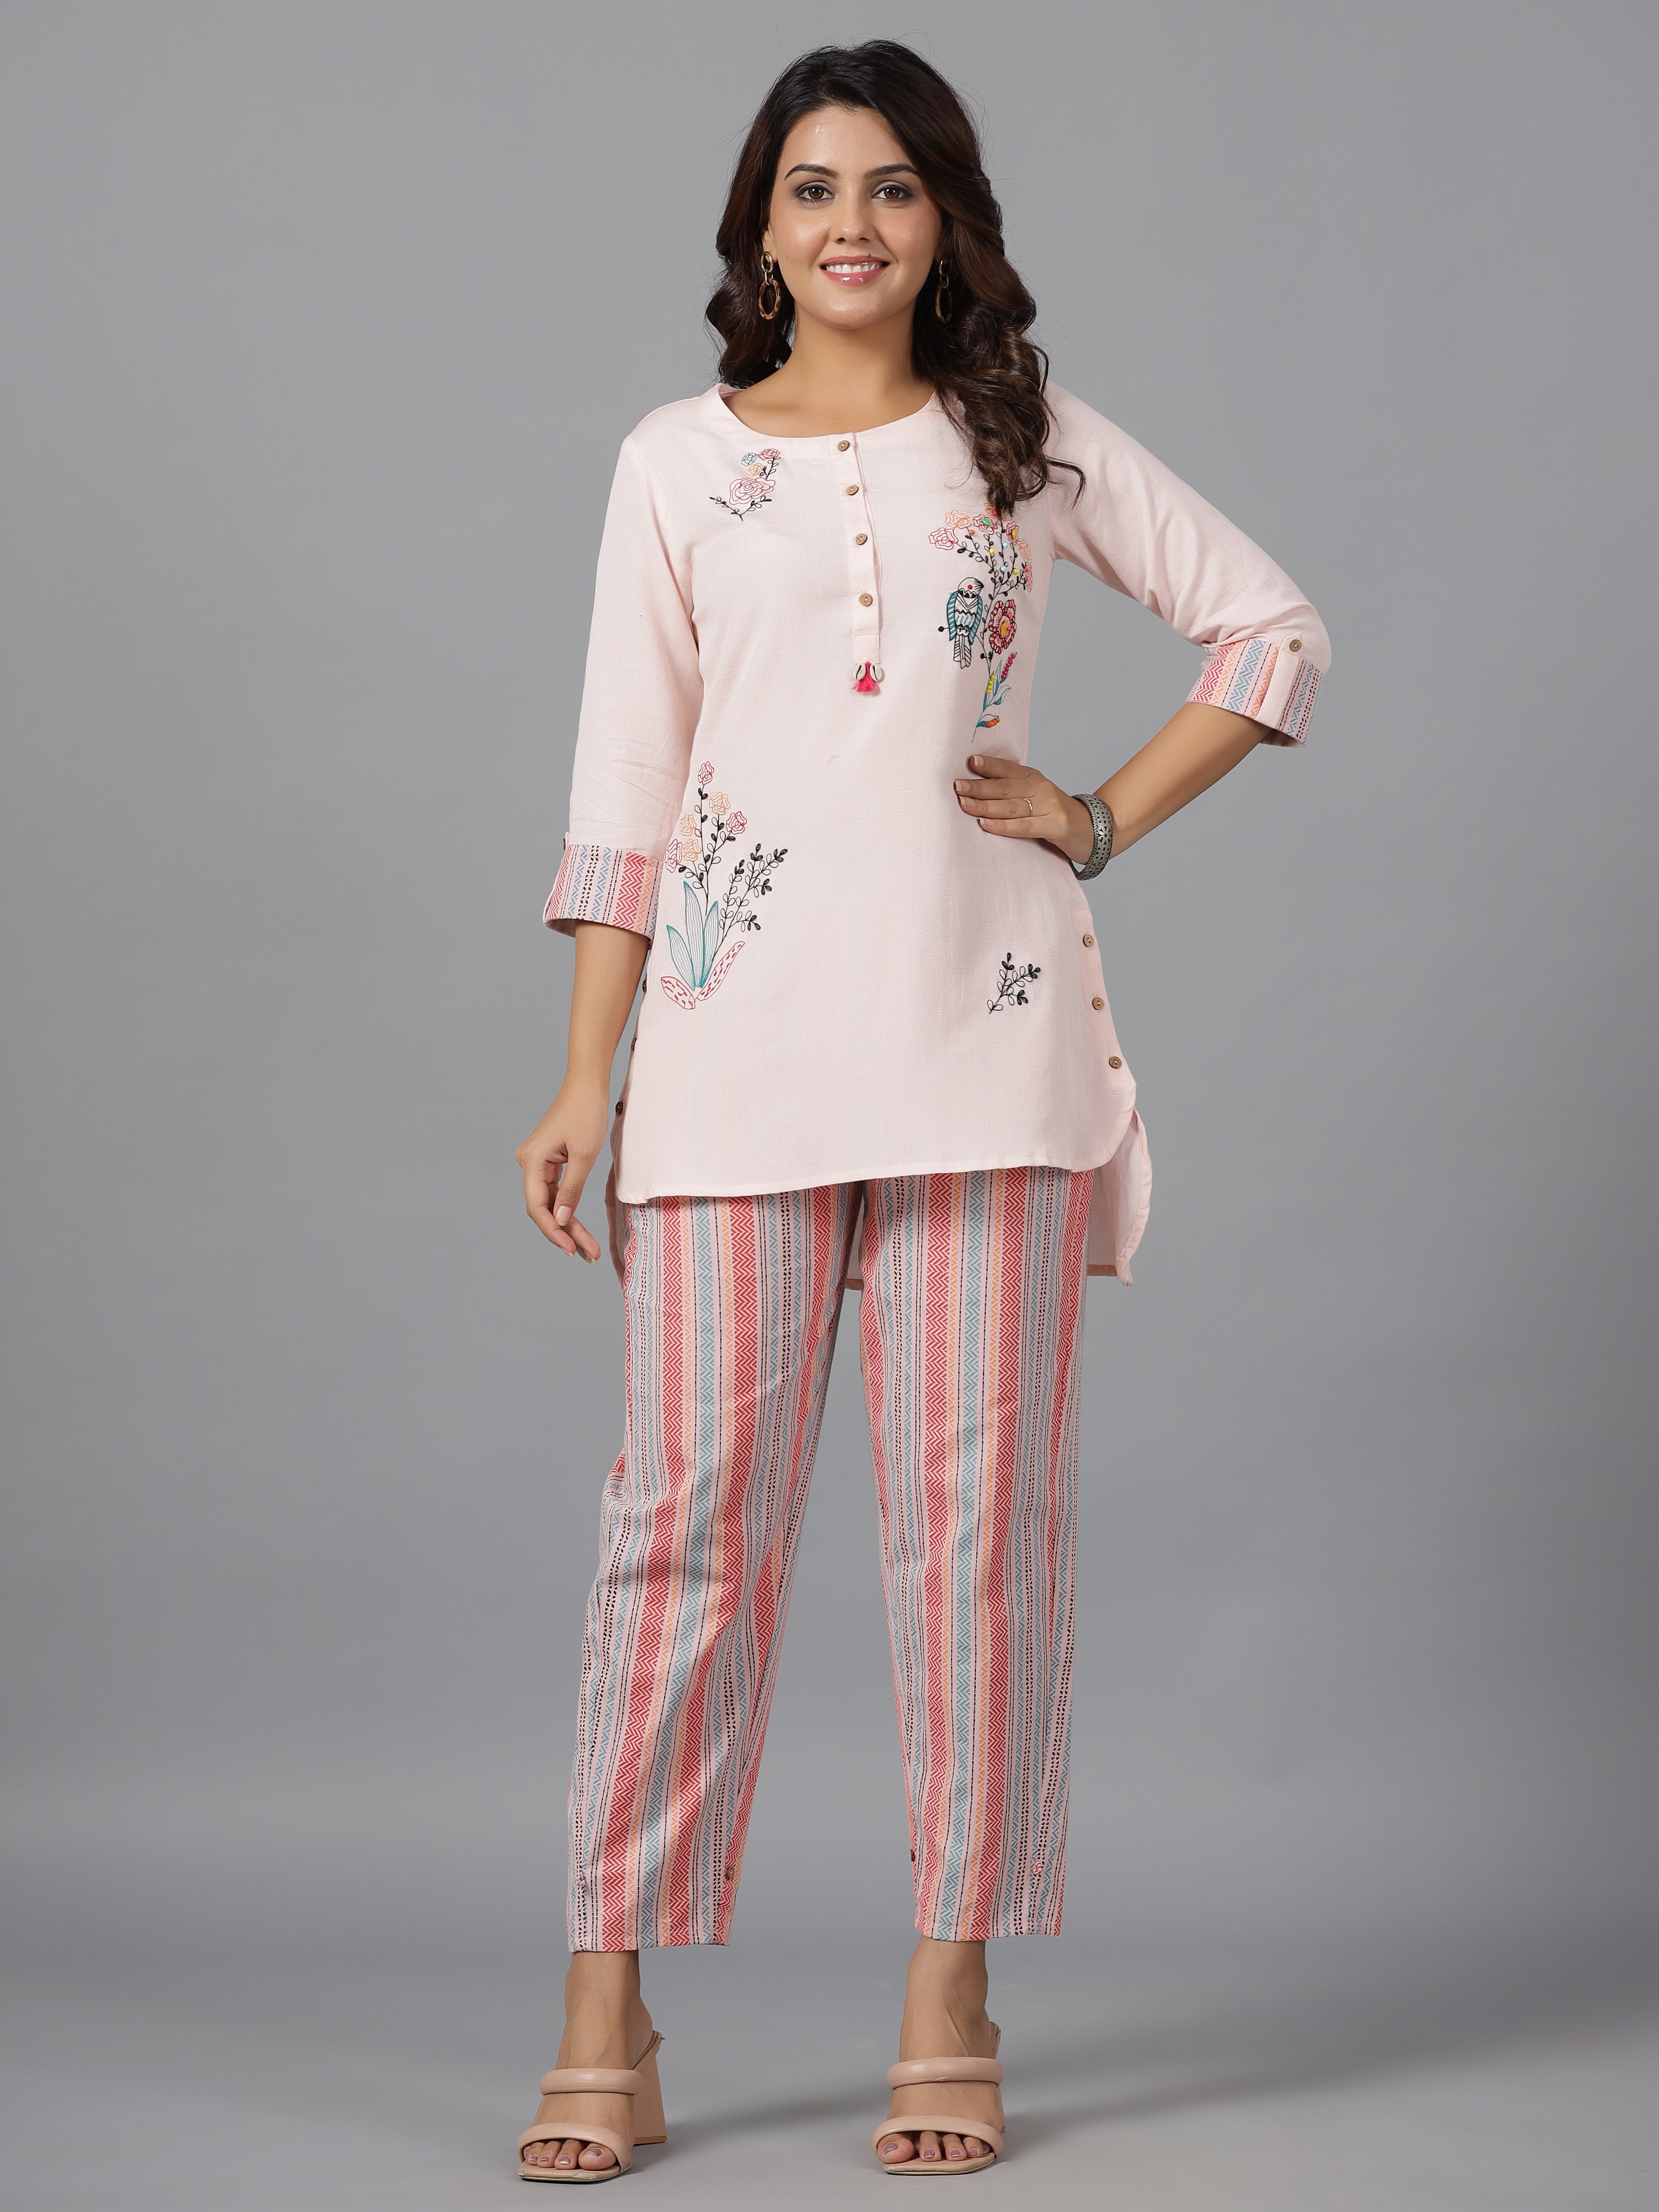 Juniper The Dhara Pink Rayon Top 7 Pants Co-Ord Set With Multi Color Embroidery Contrast Beads & Tassels